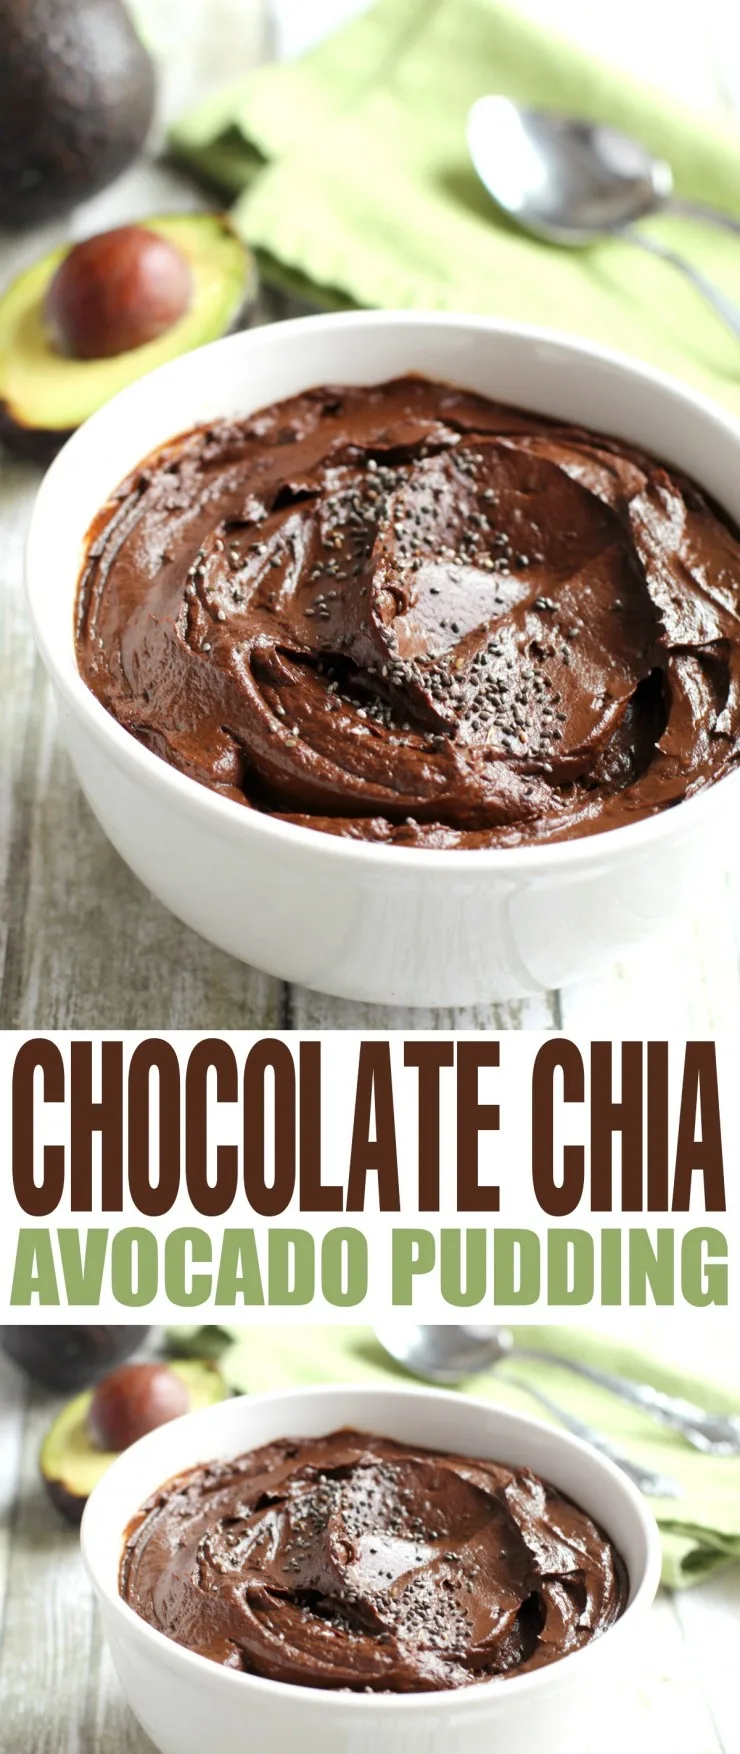 Looking for a Keto friendly sweet treat? This Keto Chocolate Chia Avocado Pudding is what you have been waiting for!